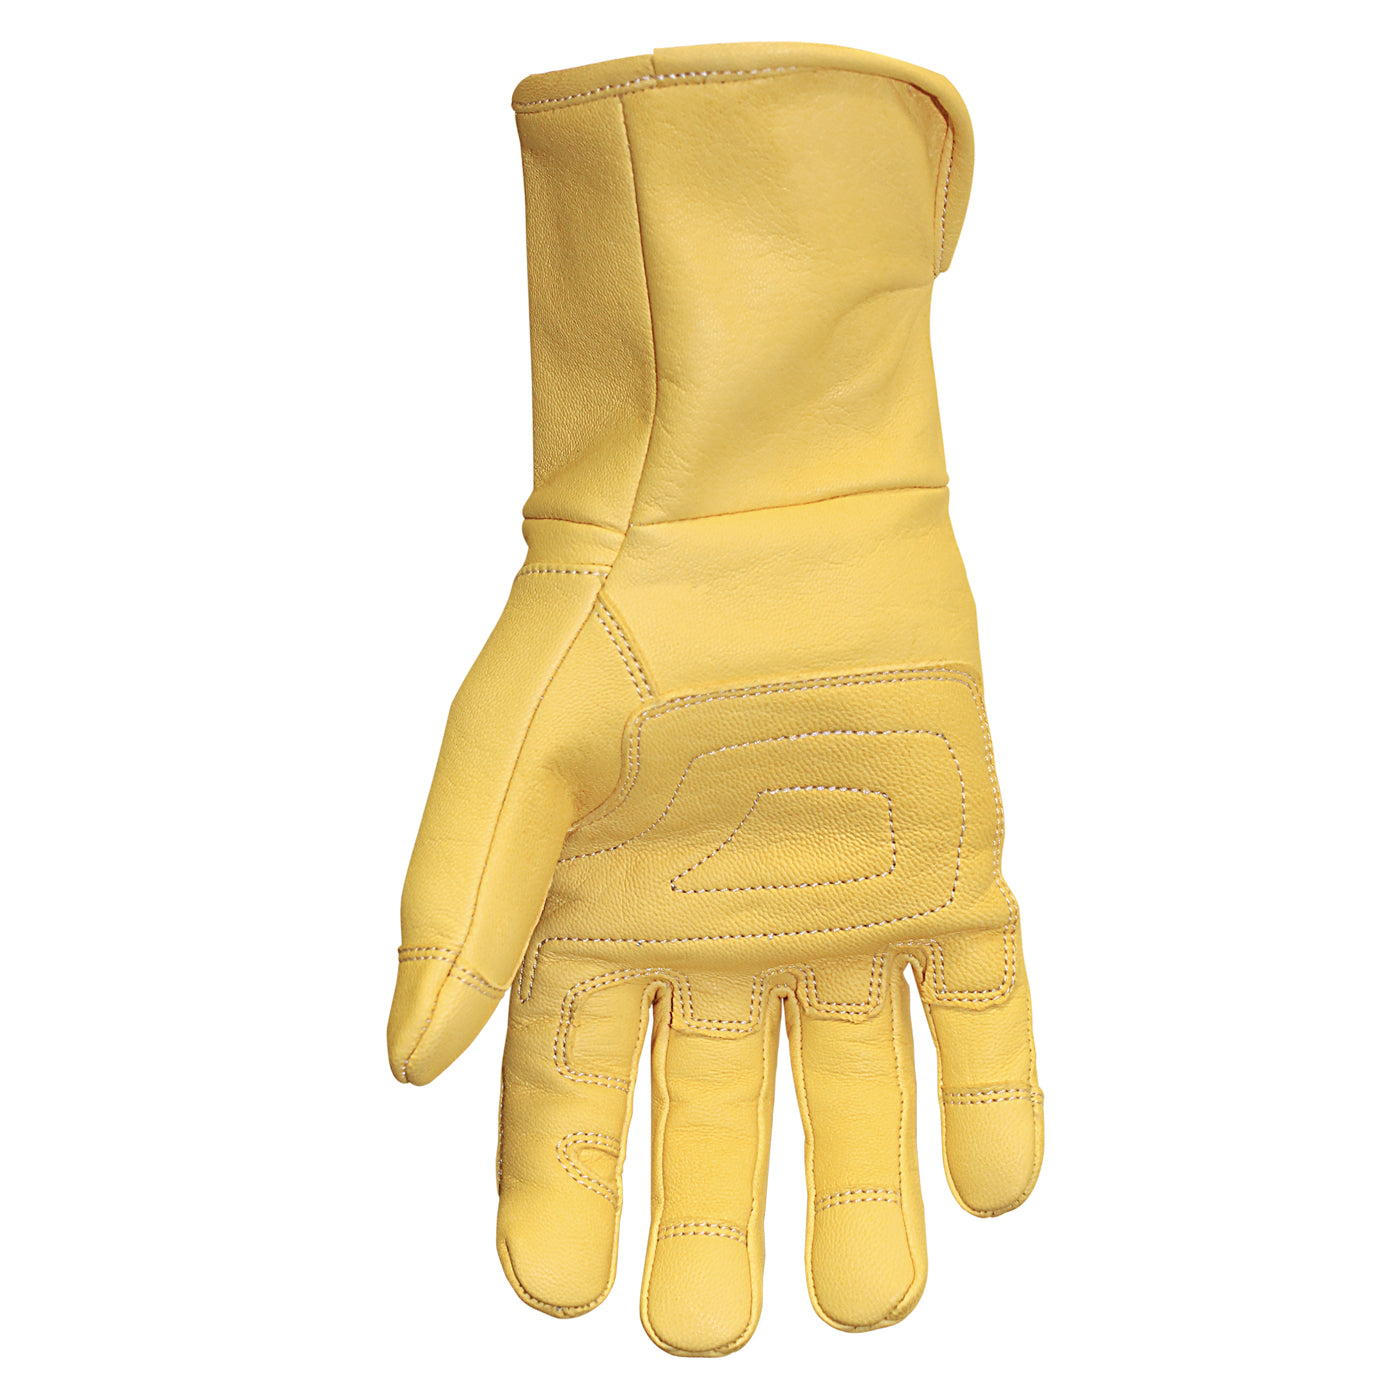 Arc Rated Gloves | Arc Flash Rated Gloves | Youngstown